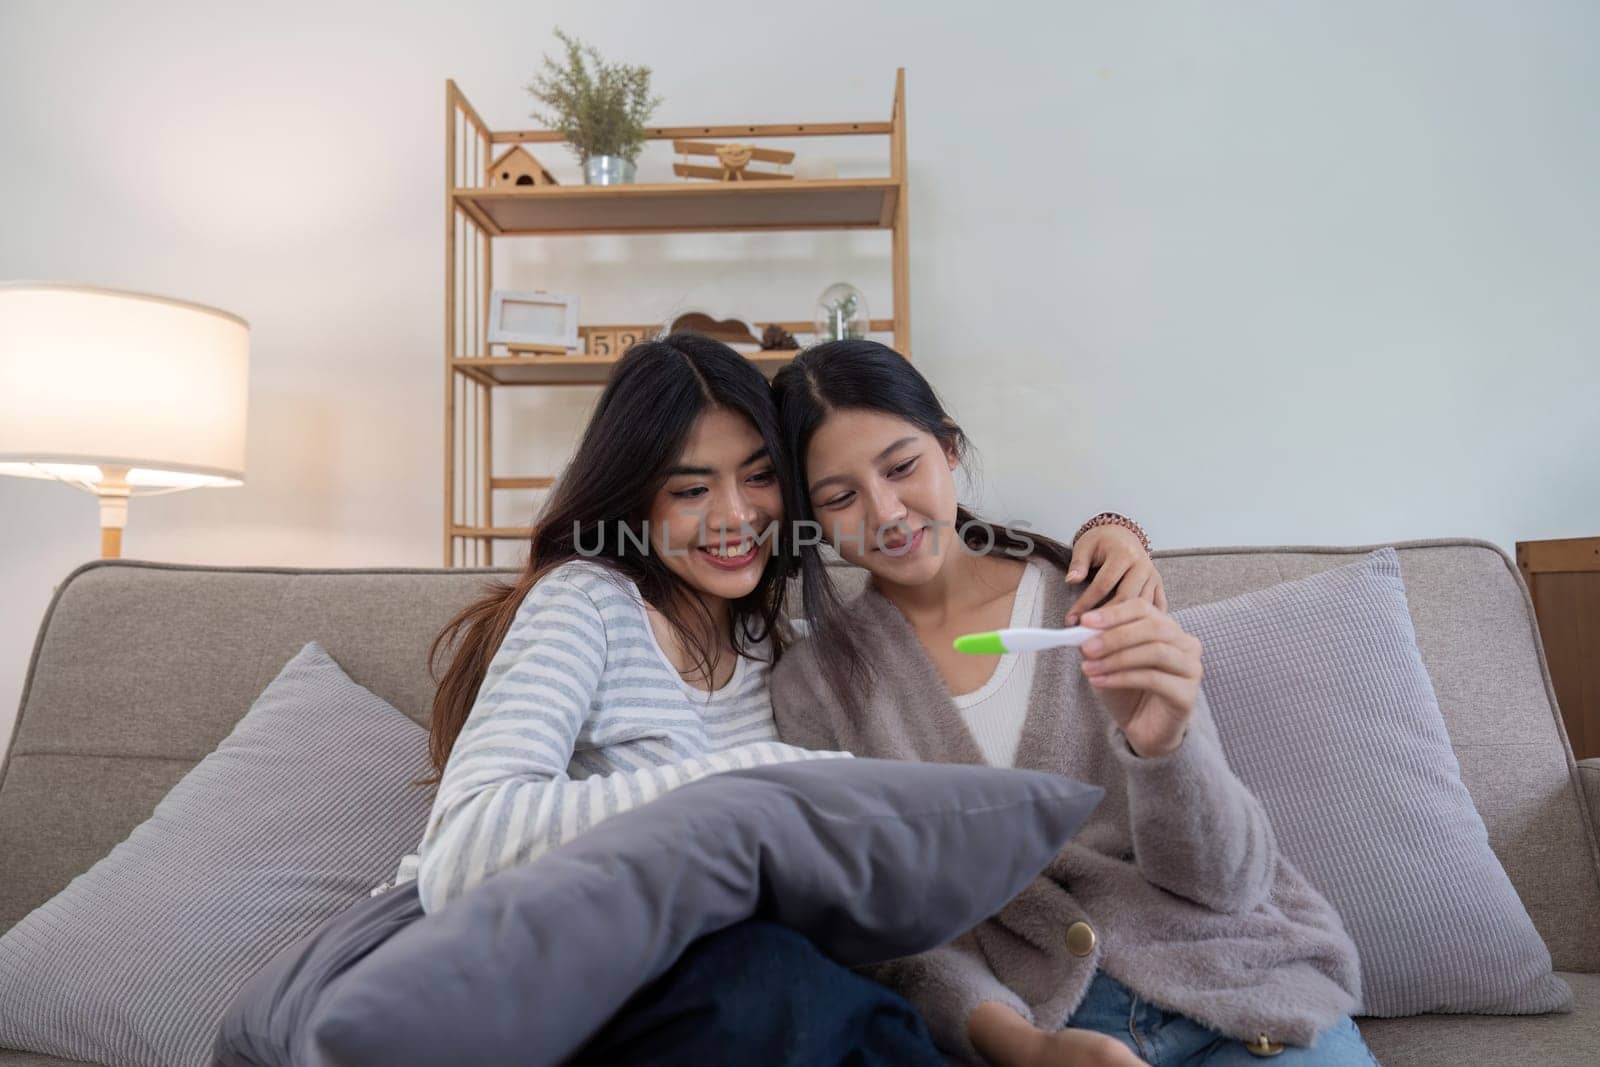 Couple smiling while looking at a positive pregnancy test on the couch at home. Women sharing a joyful moment anticipating parenthood together.